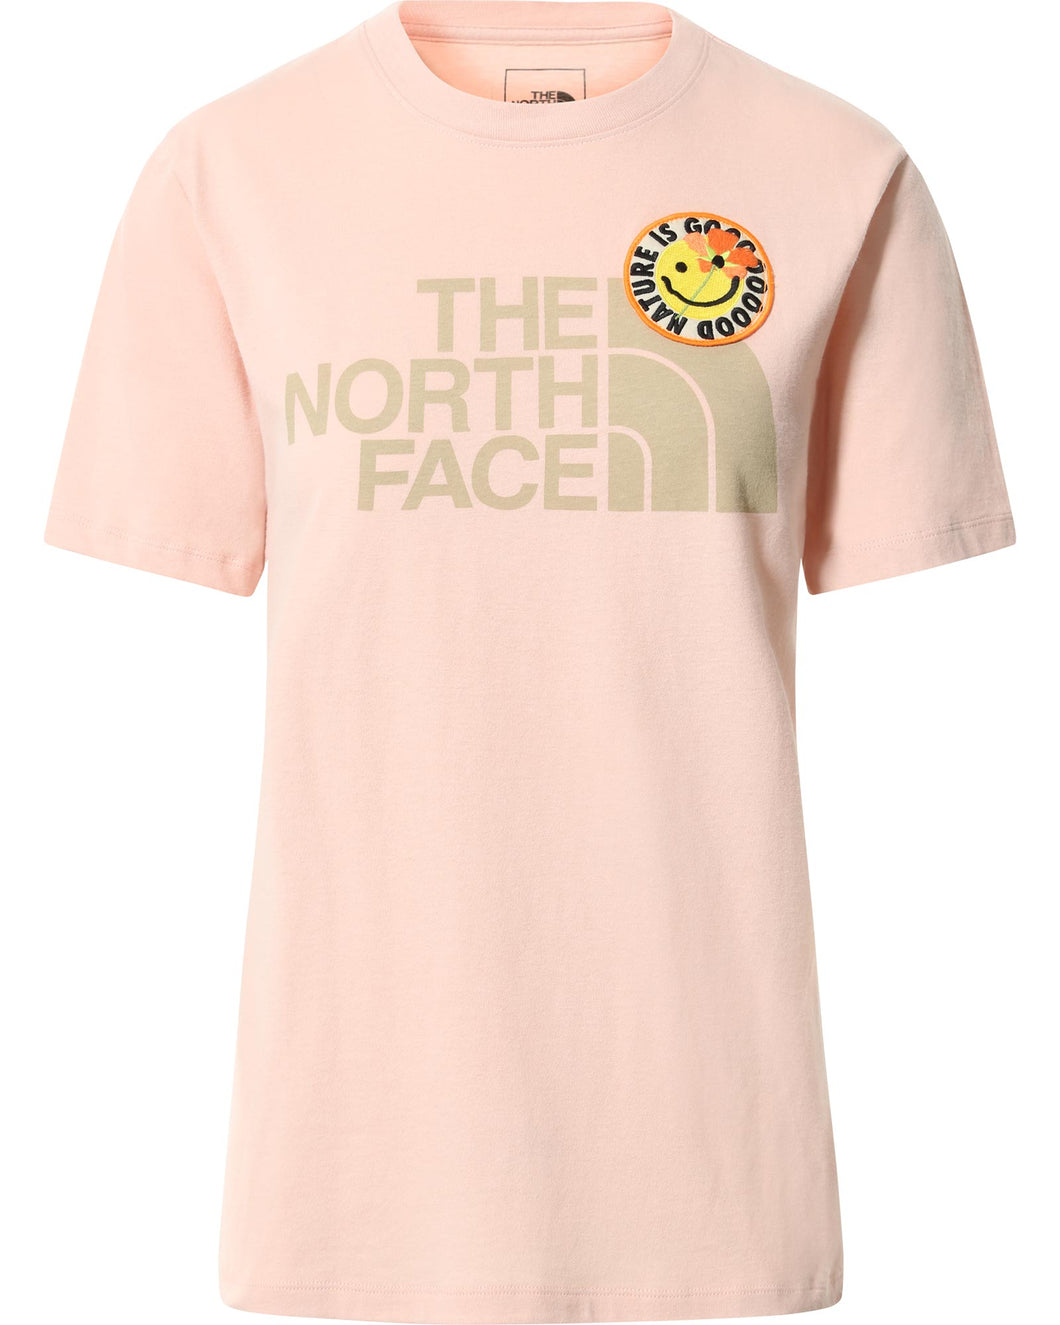 The North Face - Women's Patches S/S T-Shirt